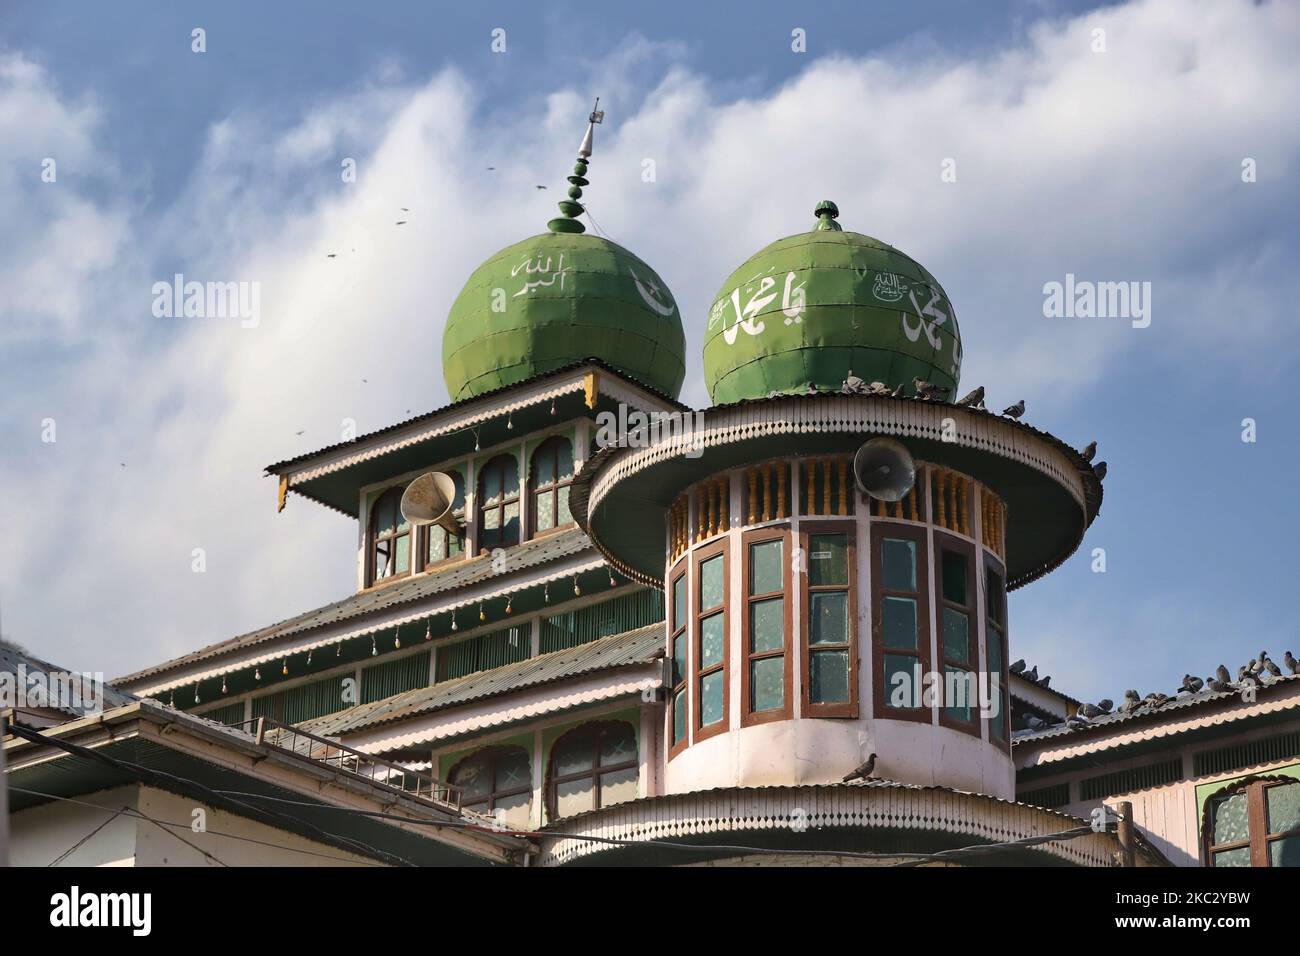 Allah-U-Akbar and Muhammad (PBUH) written on the tomb of a Shrine in the town of District Baramulla, Jammu and Kashmir, India on 30 October 2020. As the anger grows in Jammu and Kashmir over the new land laws, which allow any Indian citizen to buy land in the Union territory, the separatist Hurriyat Conference on Wednesday broke its silence and called for a one-day shutdown on October 31 to protest the â€œanti-people movesâ€ by New Delhi. (Photo by Nasir Kachroo/NurPhoto) Stock Photo